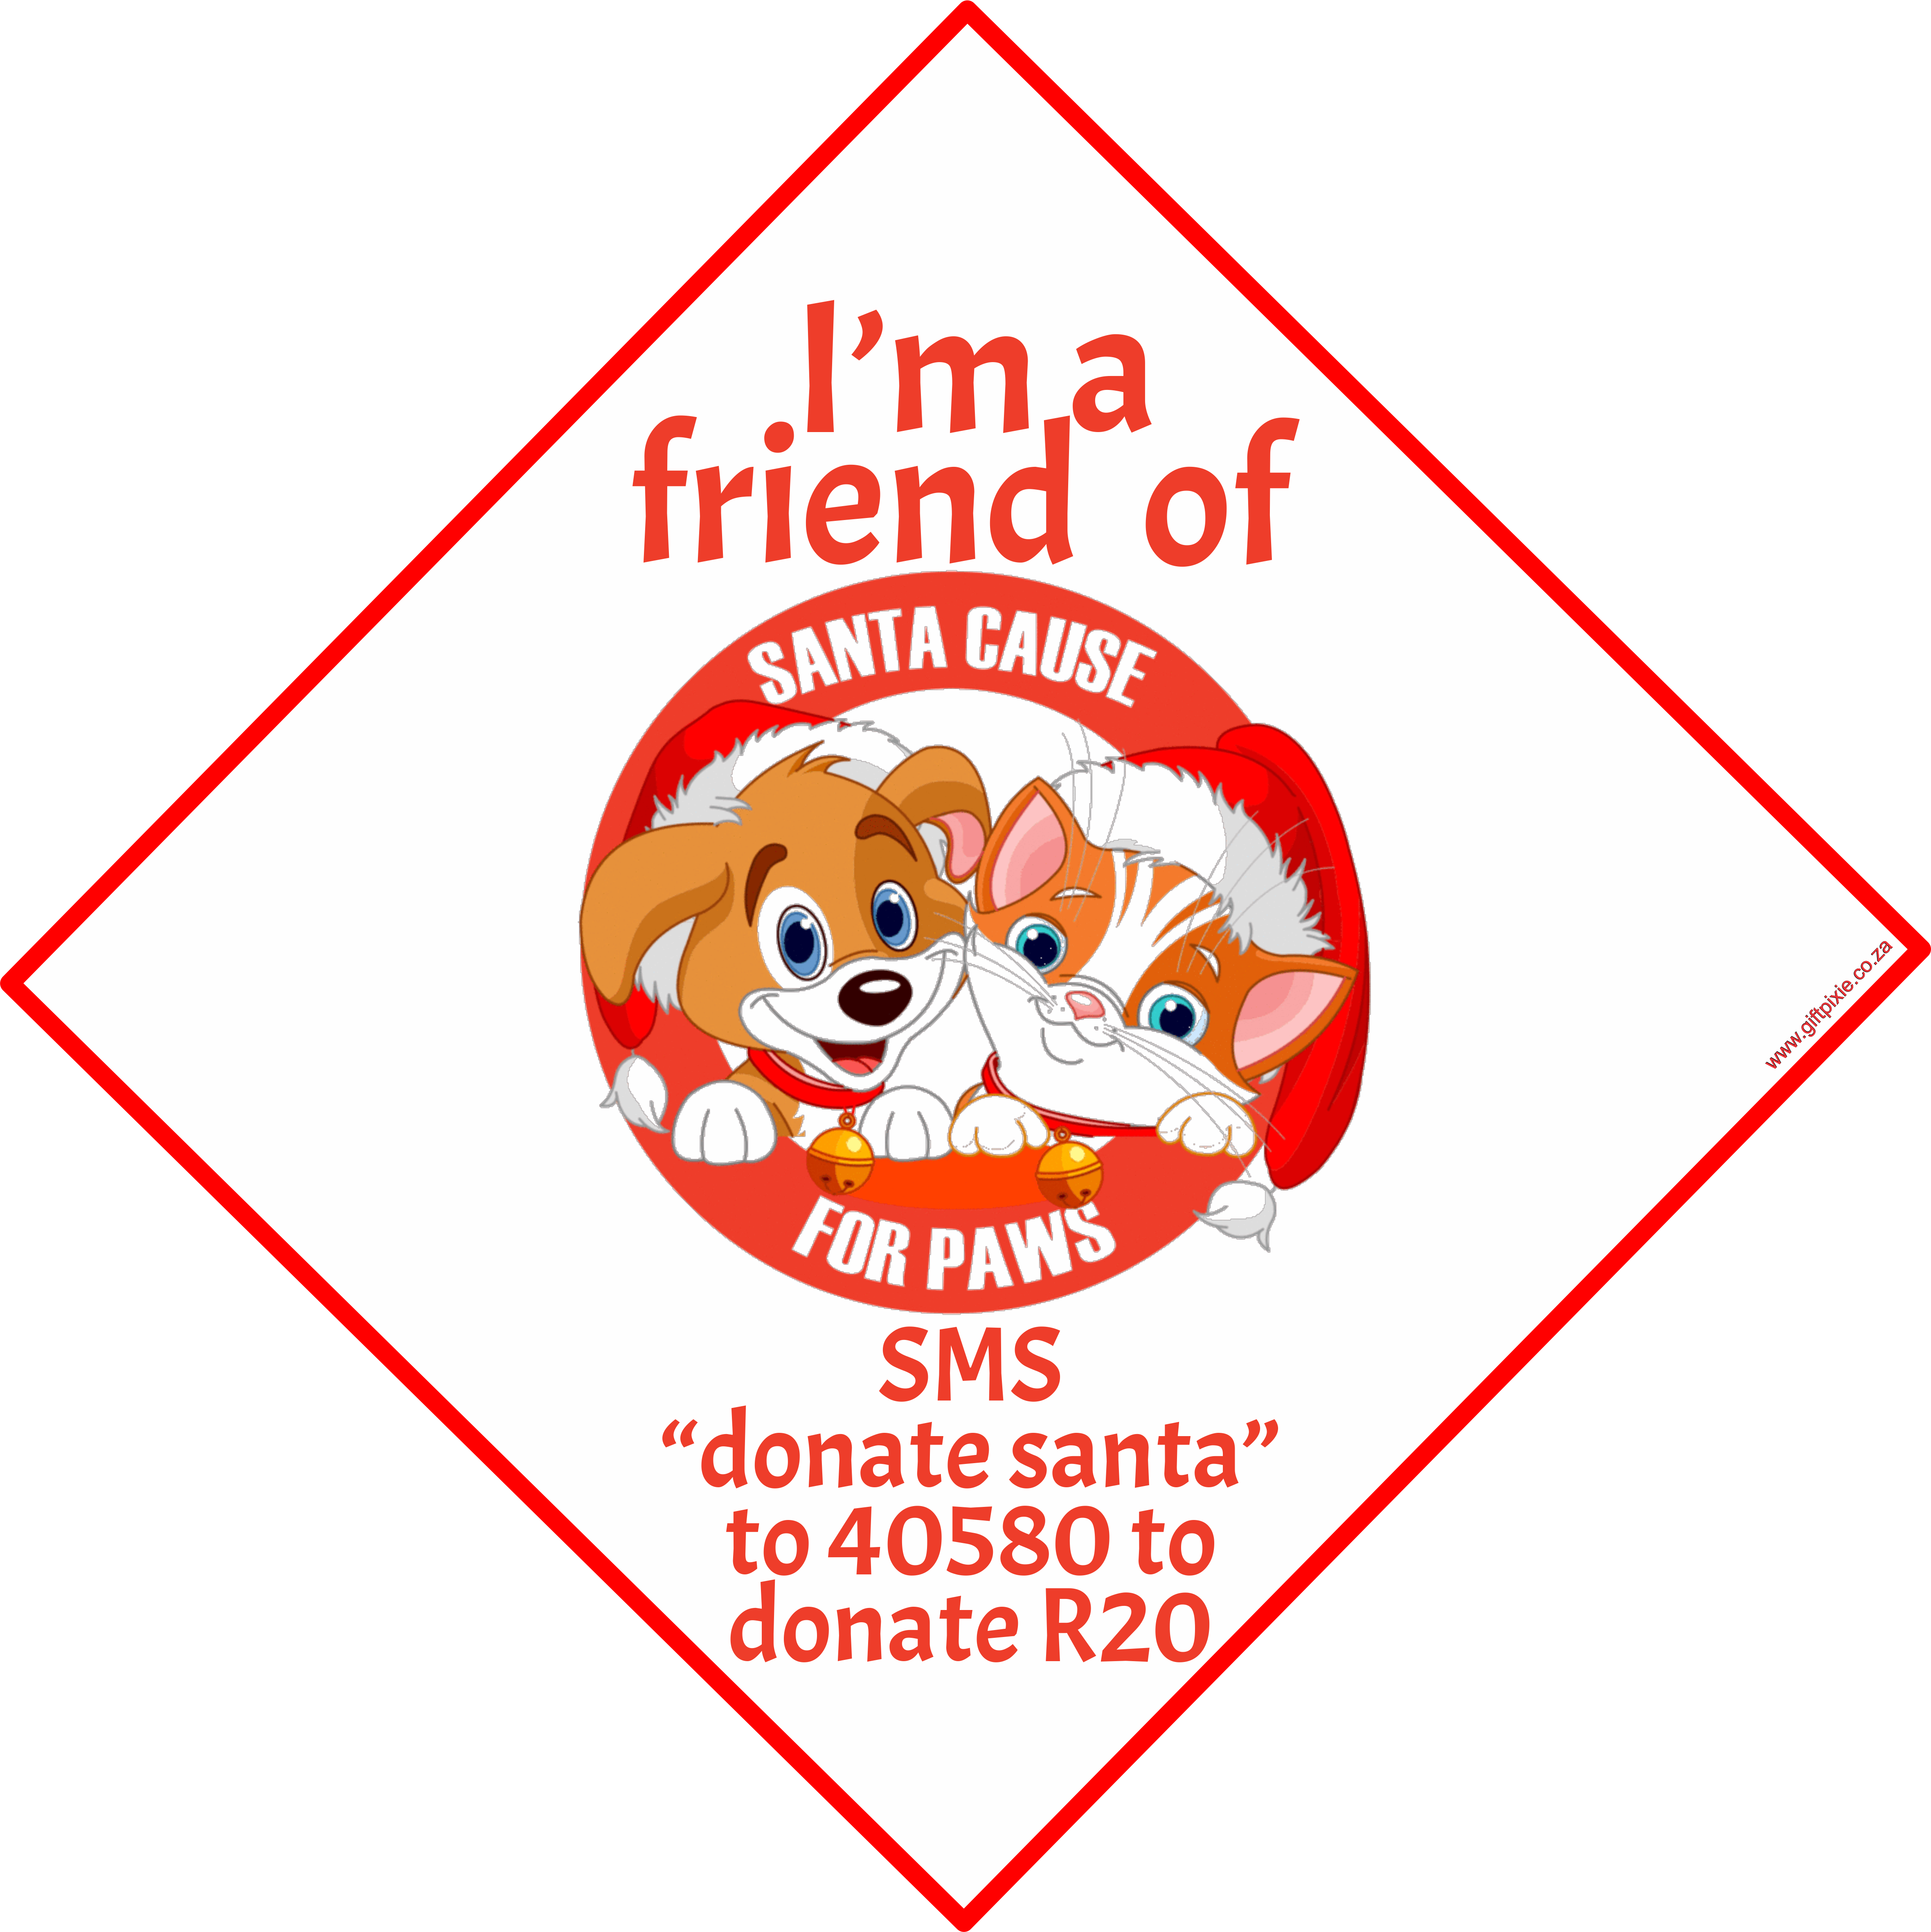 Baby on board - Donate Santa Cause for Paws